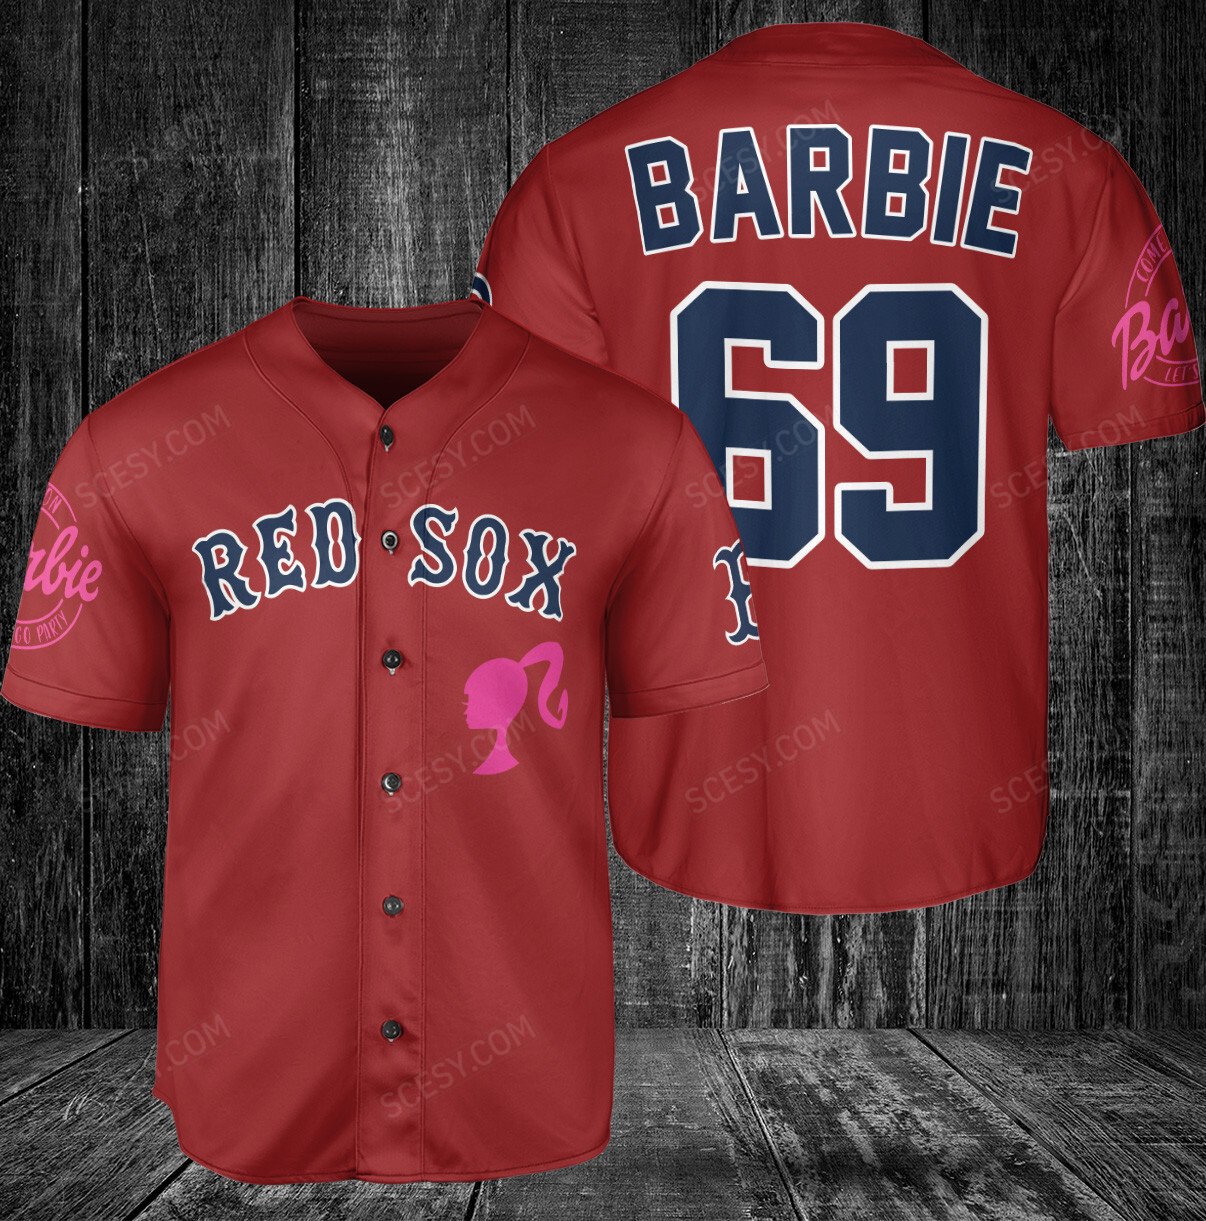 Boston Red Sox Barbie Baseball Jersey Red - Scesy